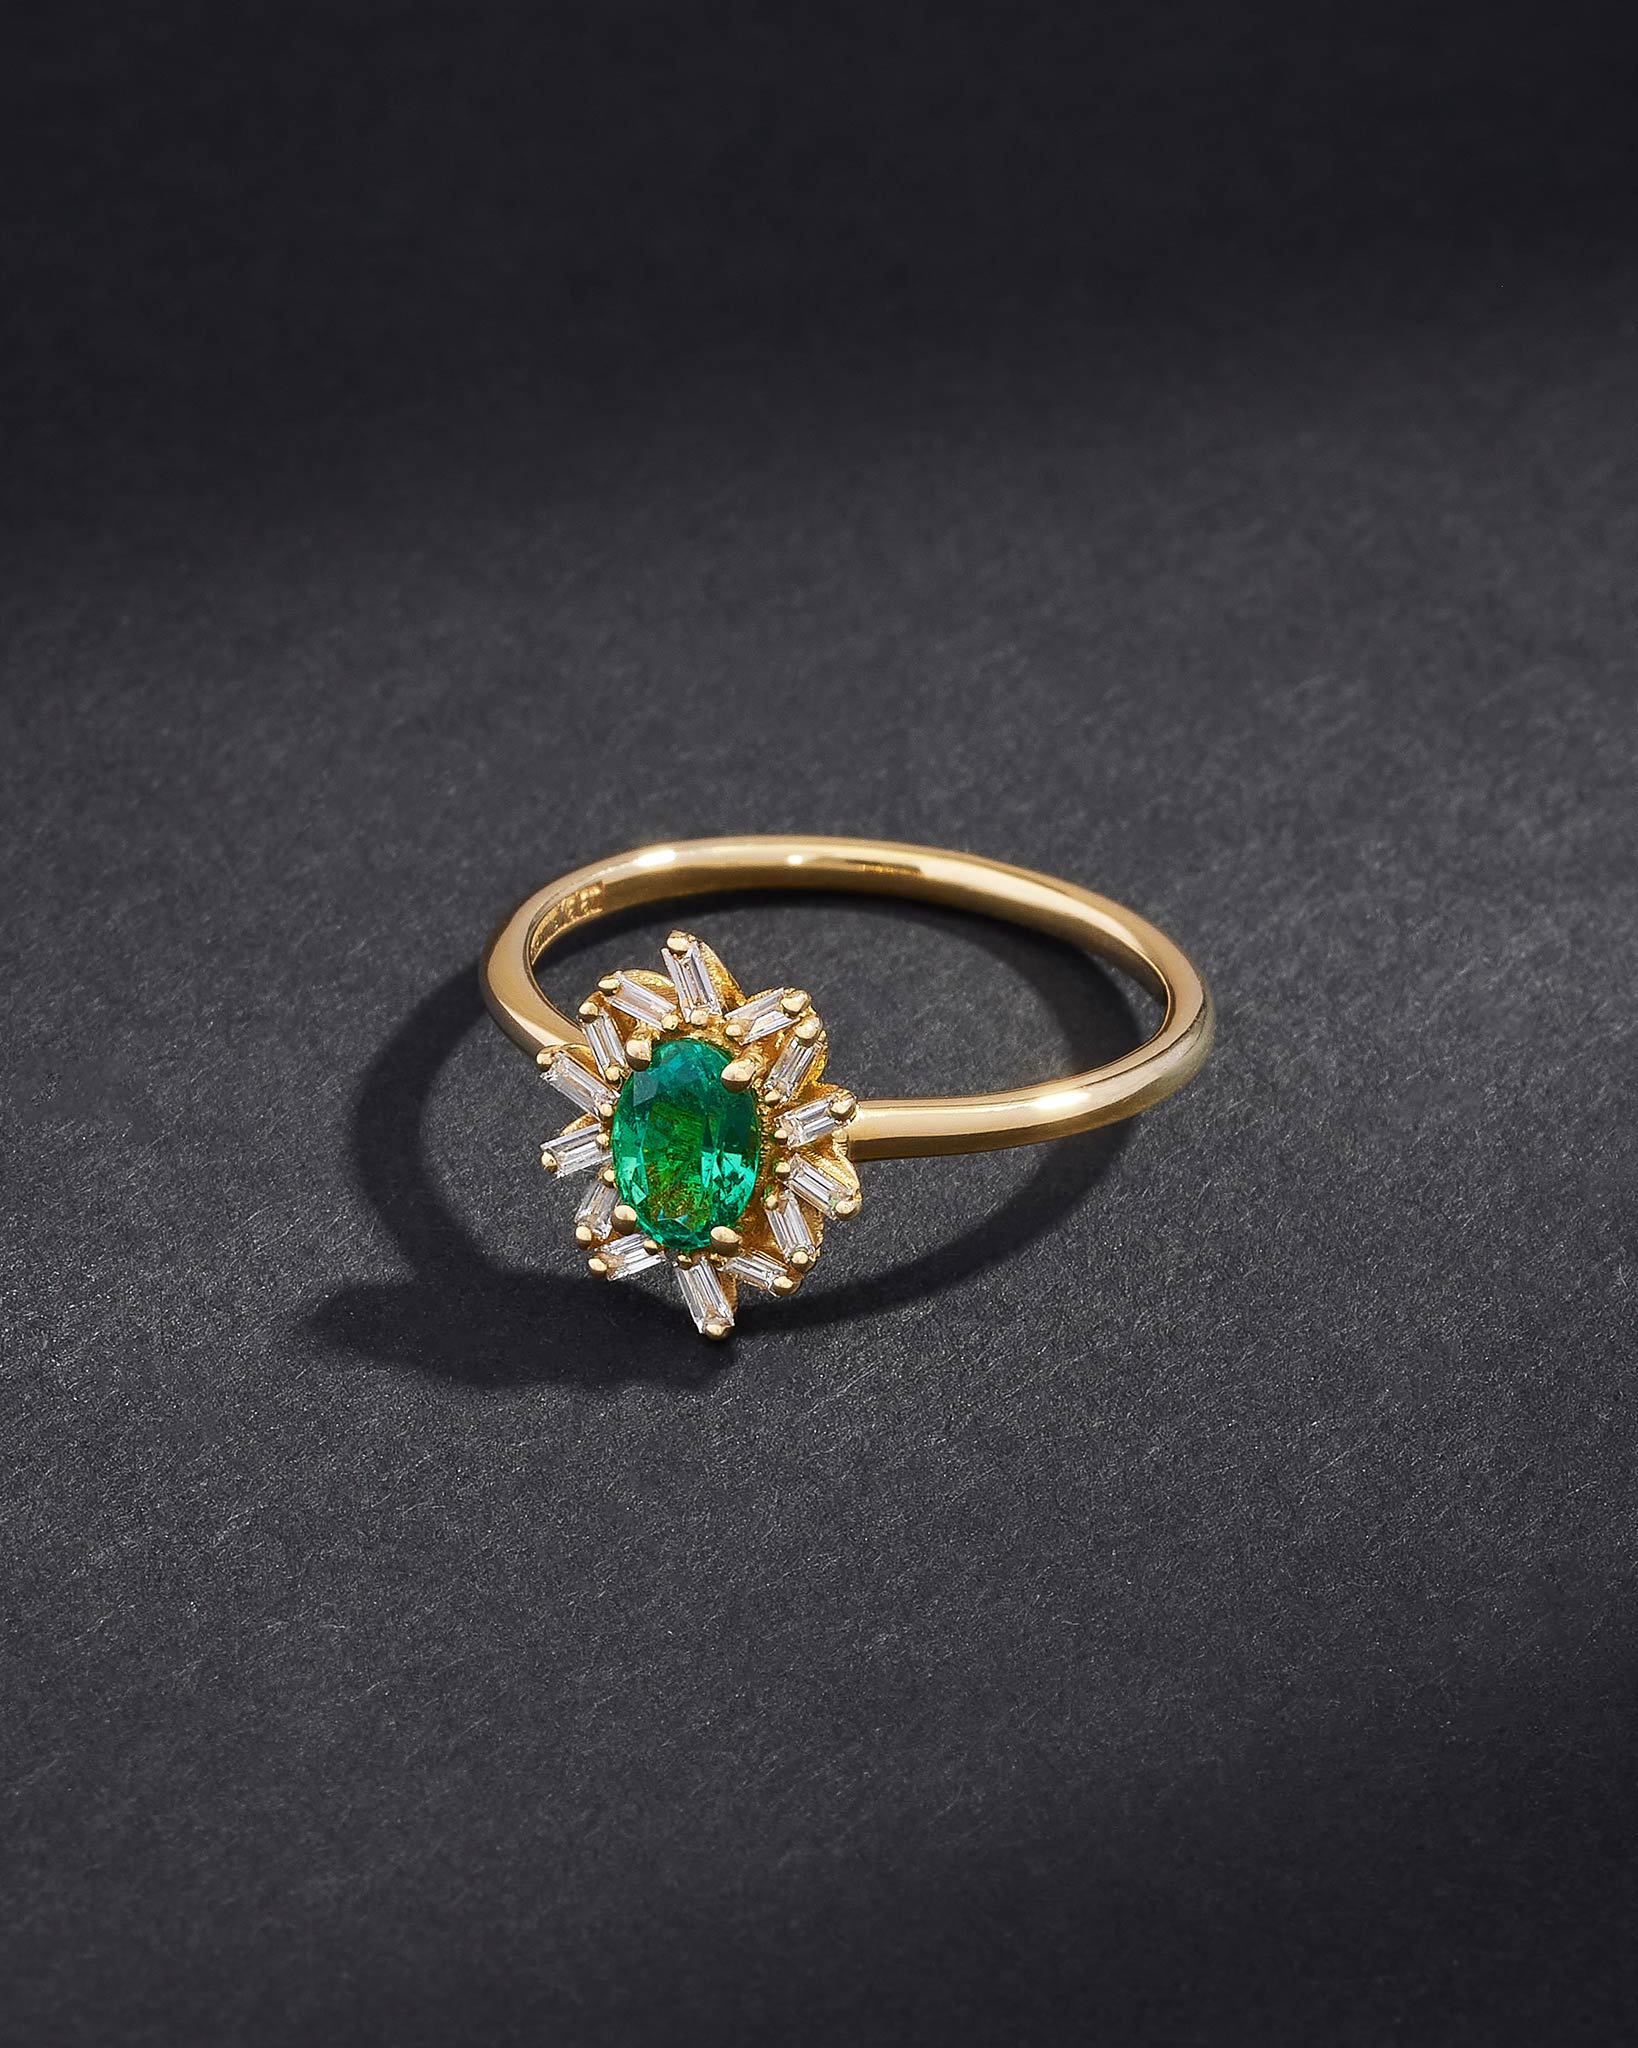 Suzanne Kalan One of a Kind Oval Cut Emerald Fireworks Ring in 18k yellow gold